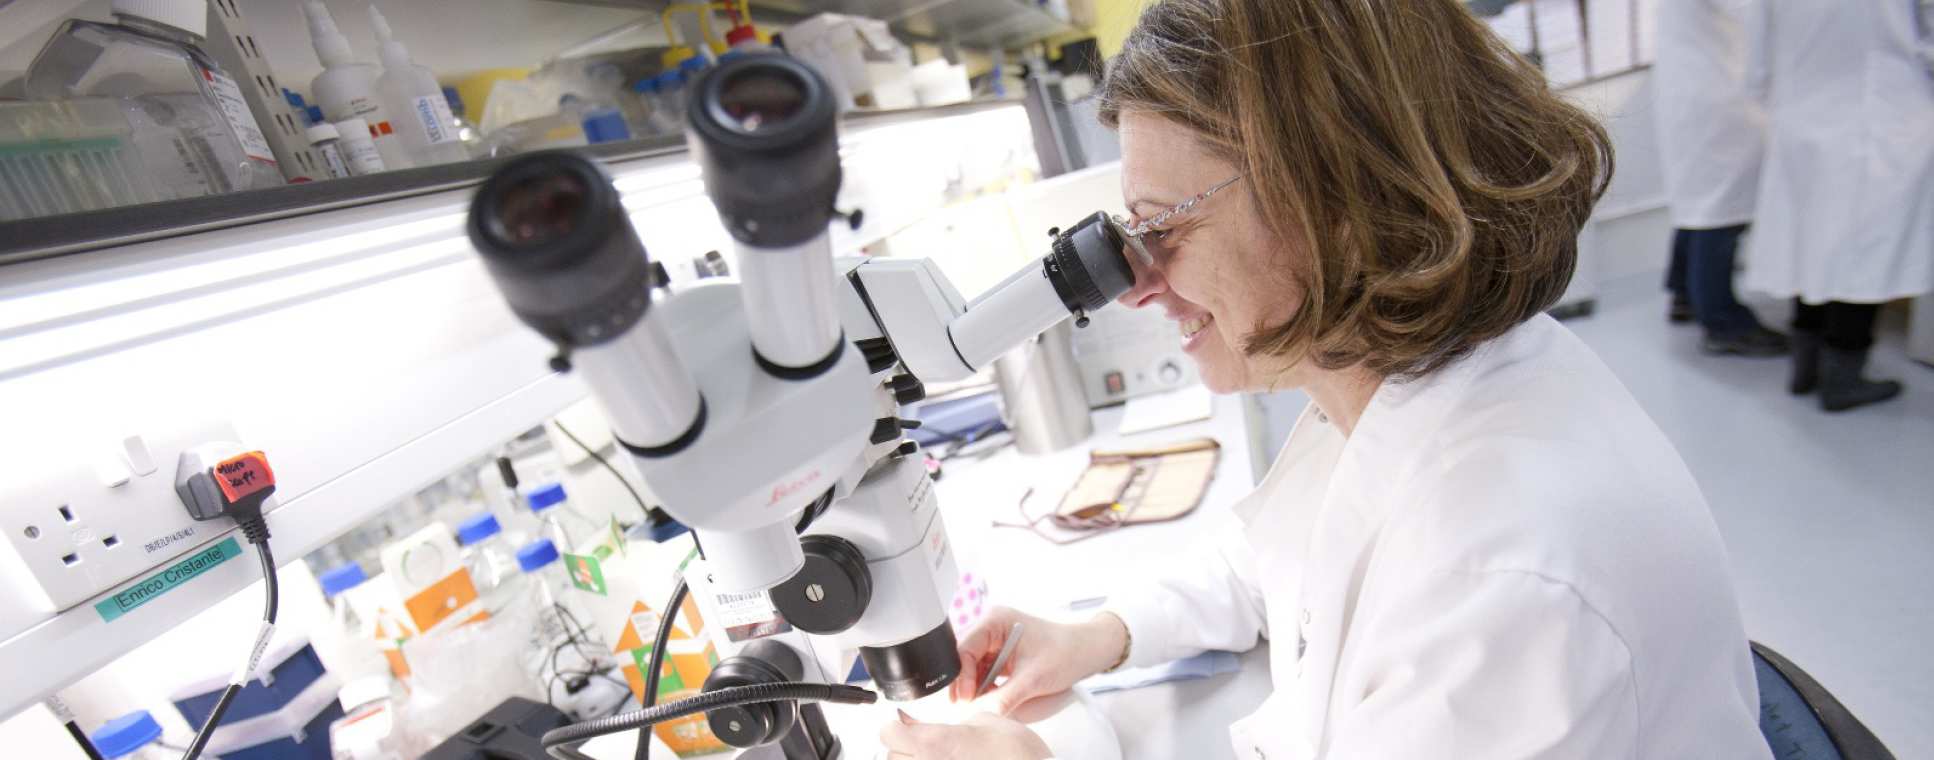 A researcher examining specimens with HPRU microscopic equipment